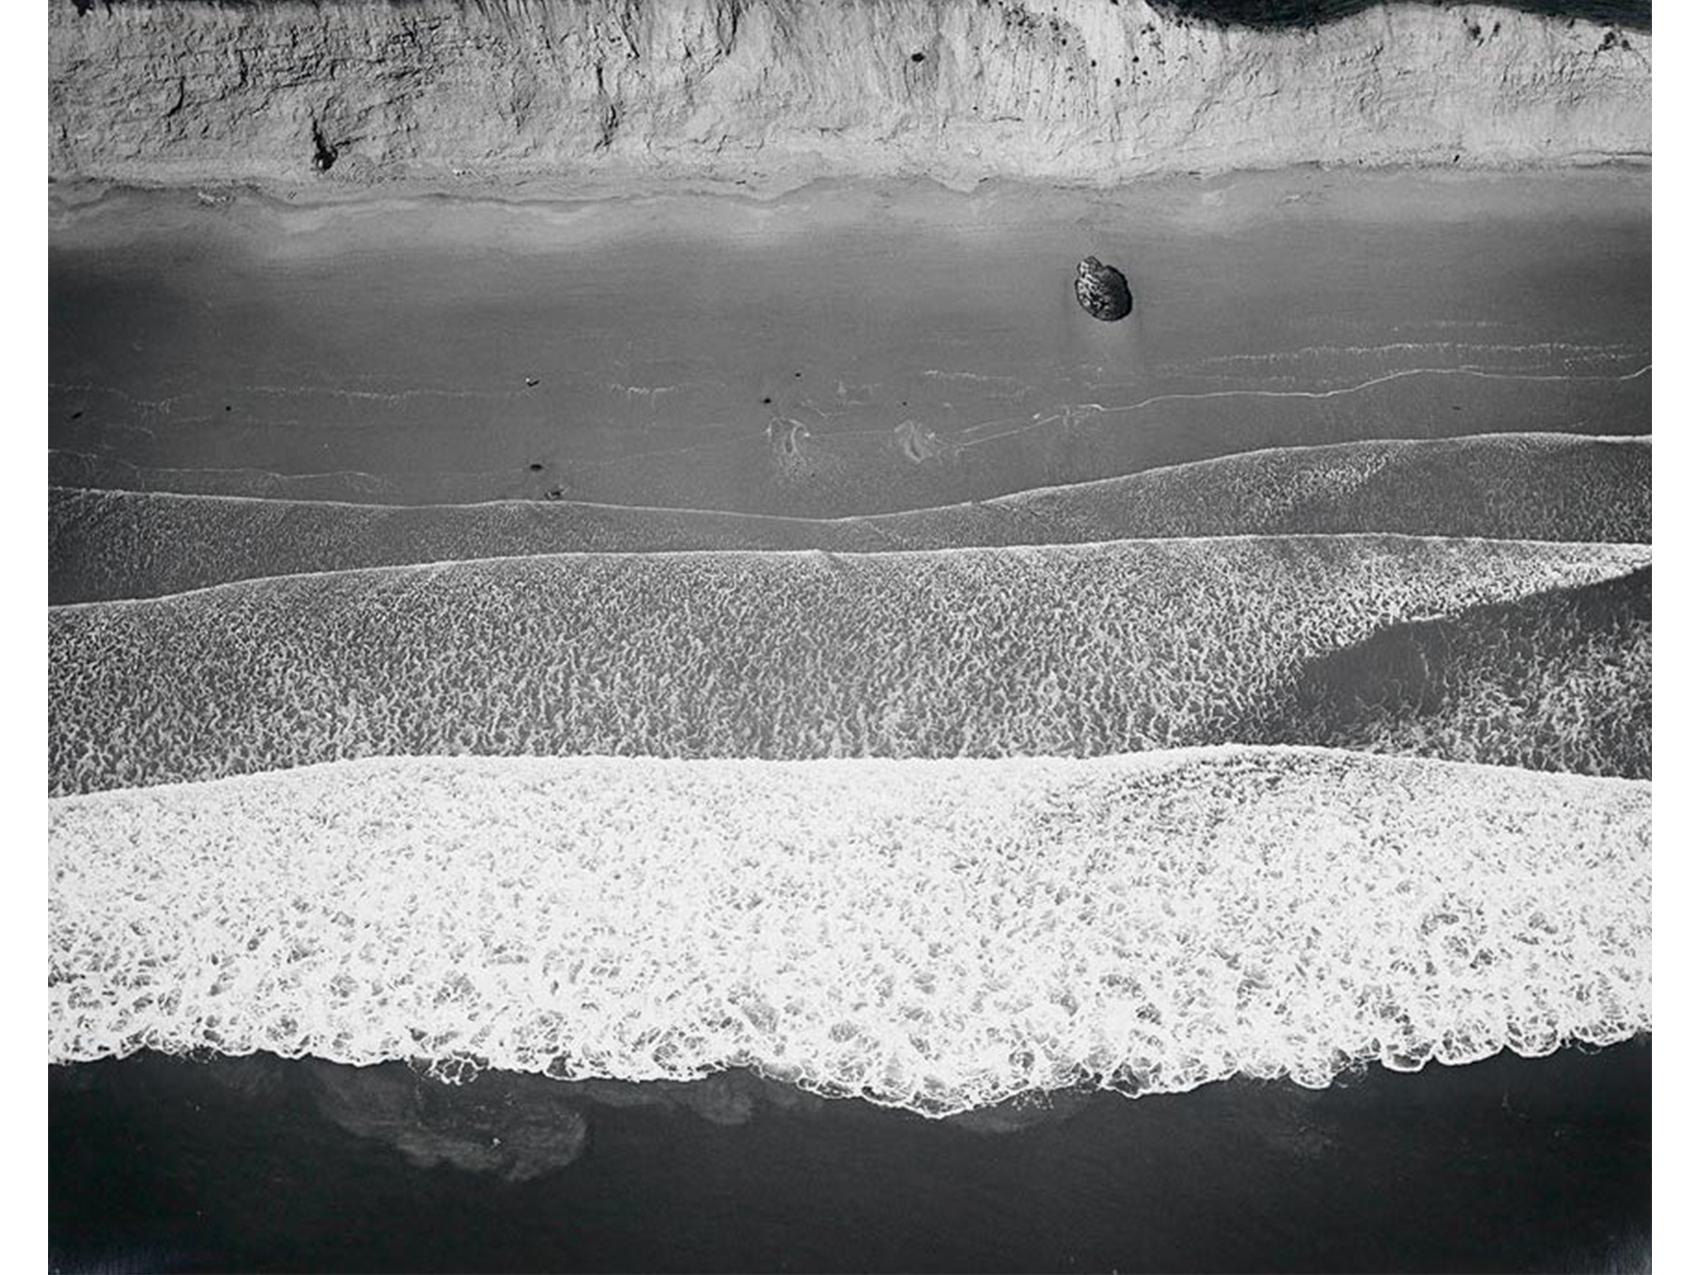 aerial view of shore with water and white foamy waves in lower image, beach and ridge of hill in upper half